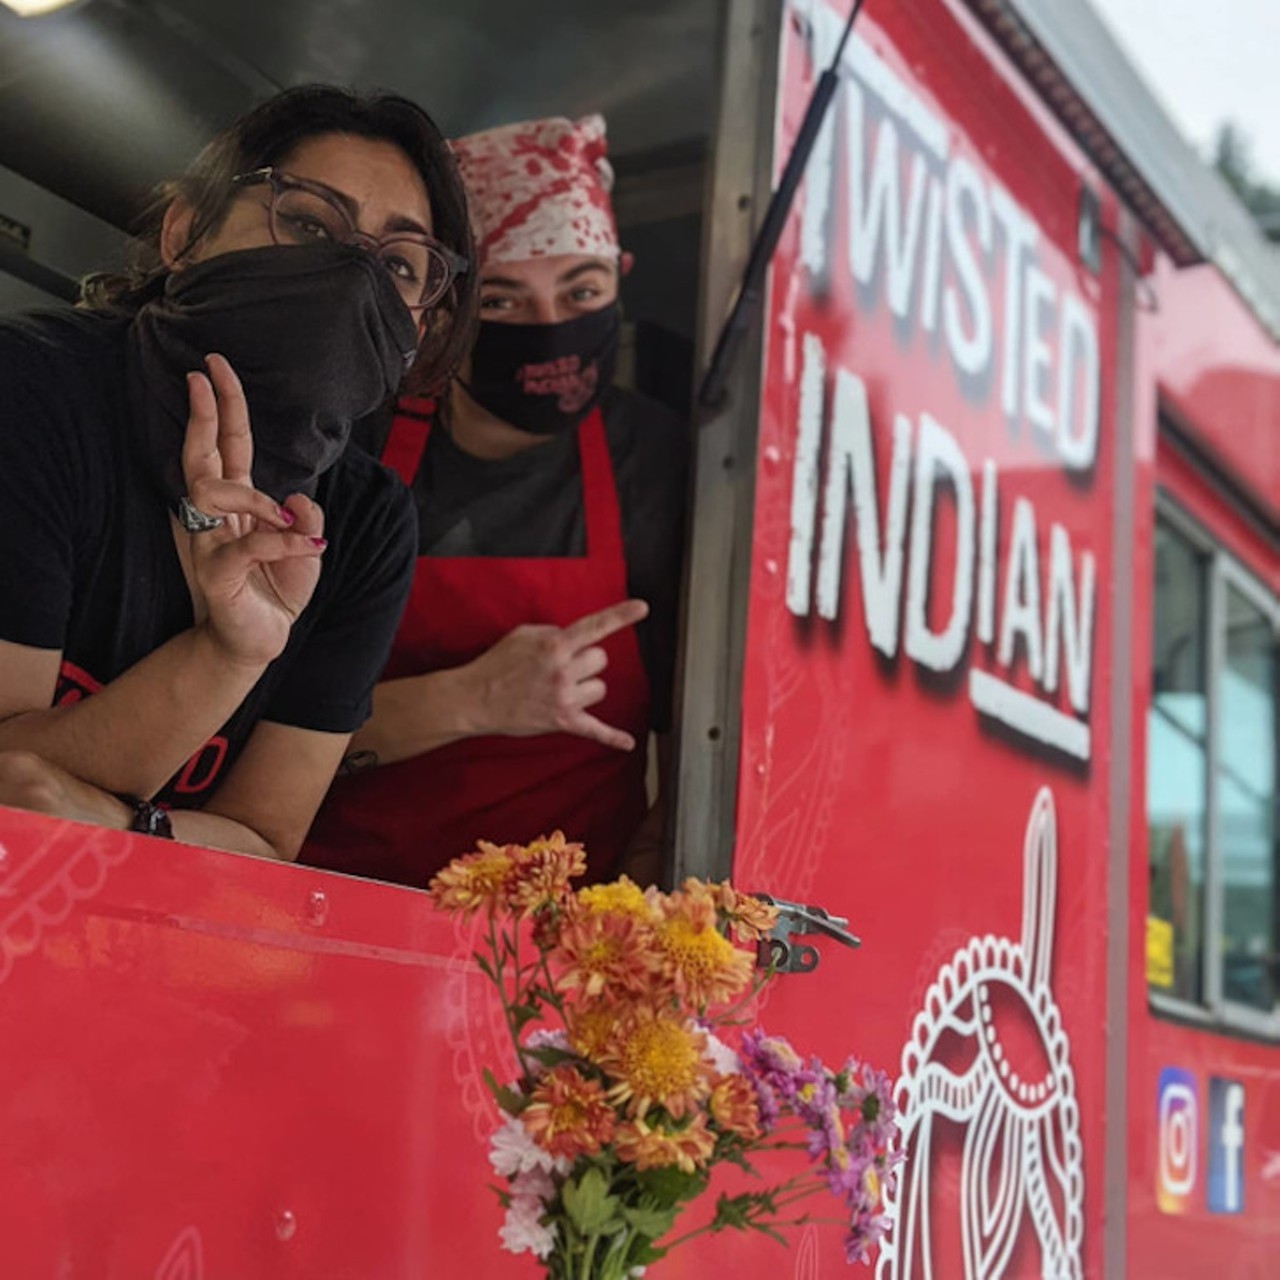 Twisted Indian  
2641 Central Ave., St. Petersburg 
St. Pete Rising says the popular food truck is shooting for a spring opening for a brick and mortar location in St. Petersburg&#146;s Grand Central neighborhood.  The menu will include some of the Indian food truck&#146;s popular dishes like tikka masala naanwiches in addition to new items.